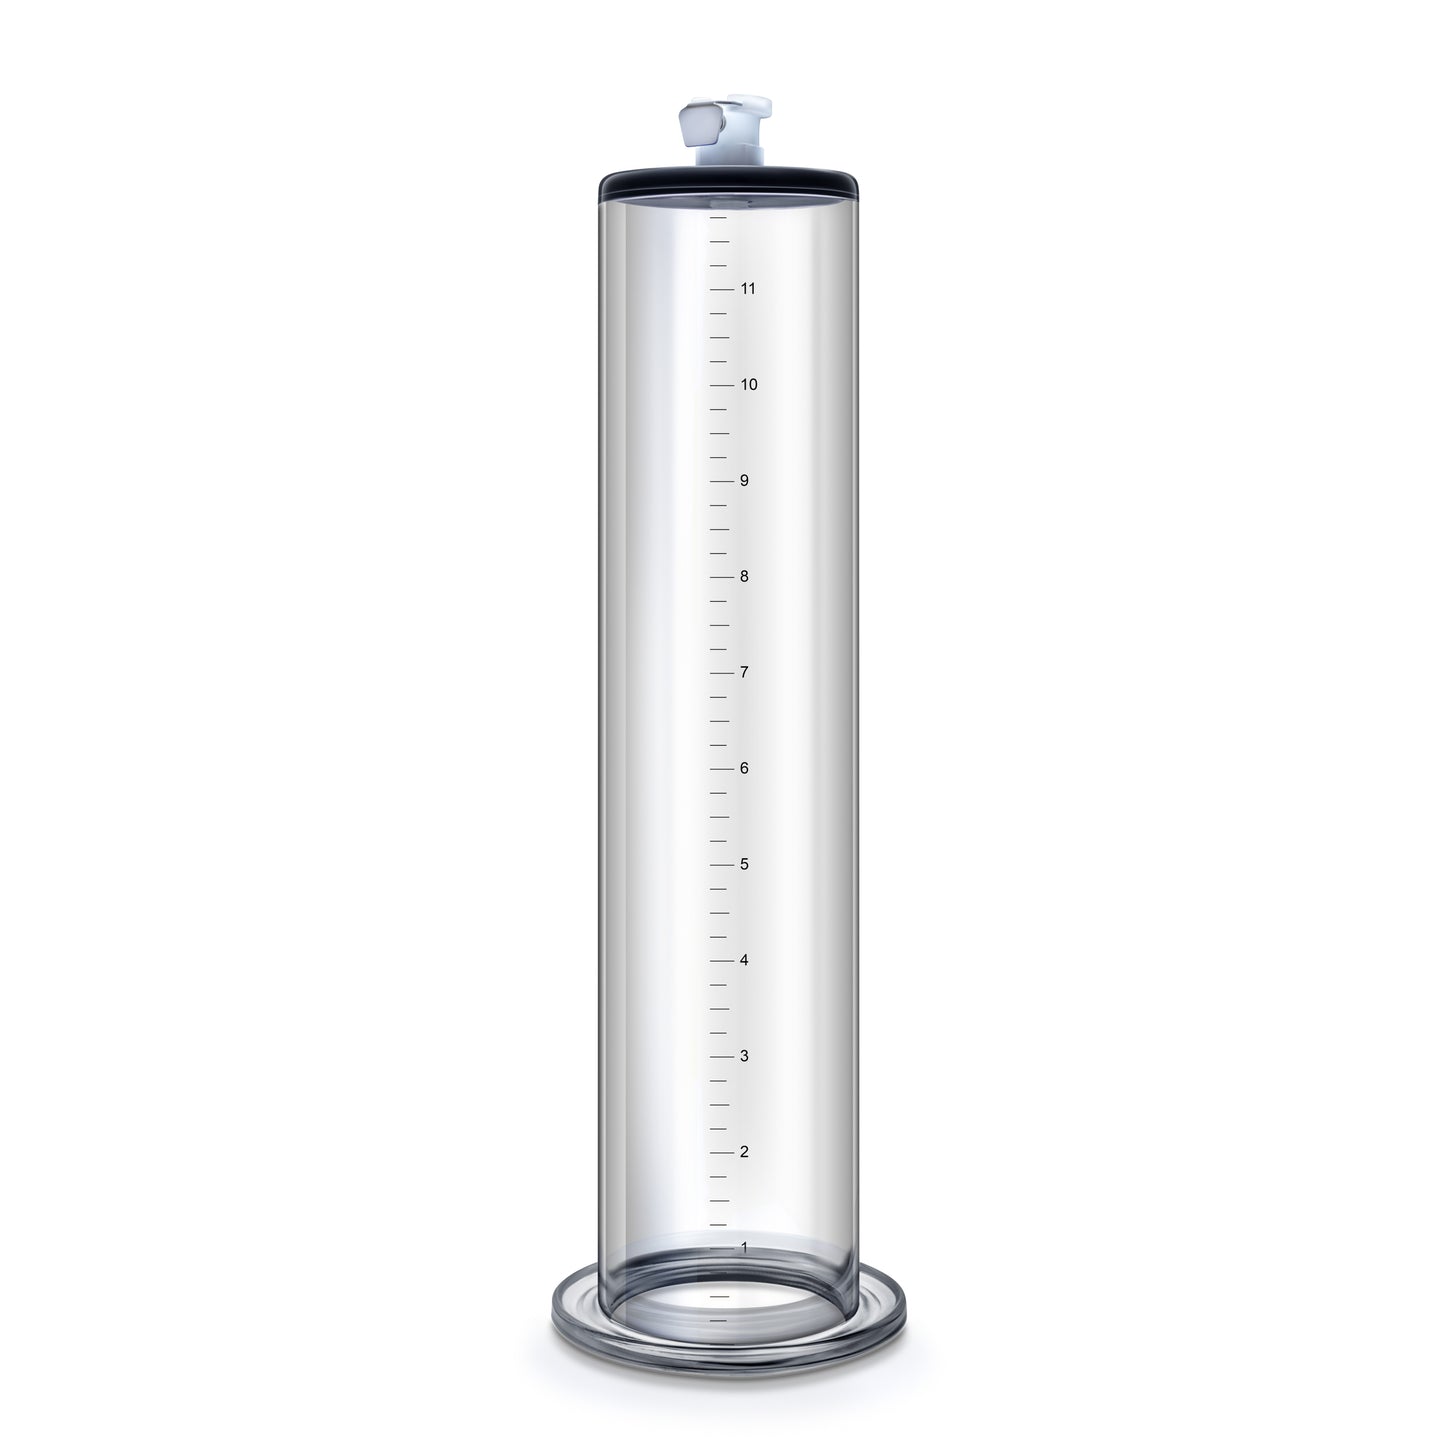 Performance  12 Inch X 2.5 Inch Penis Pump  Cylinder  Clear